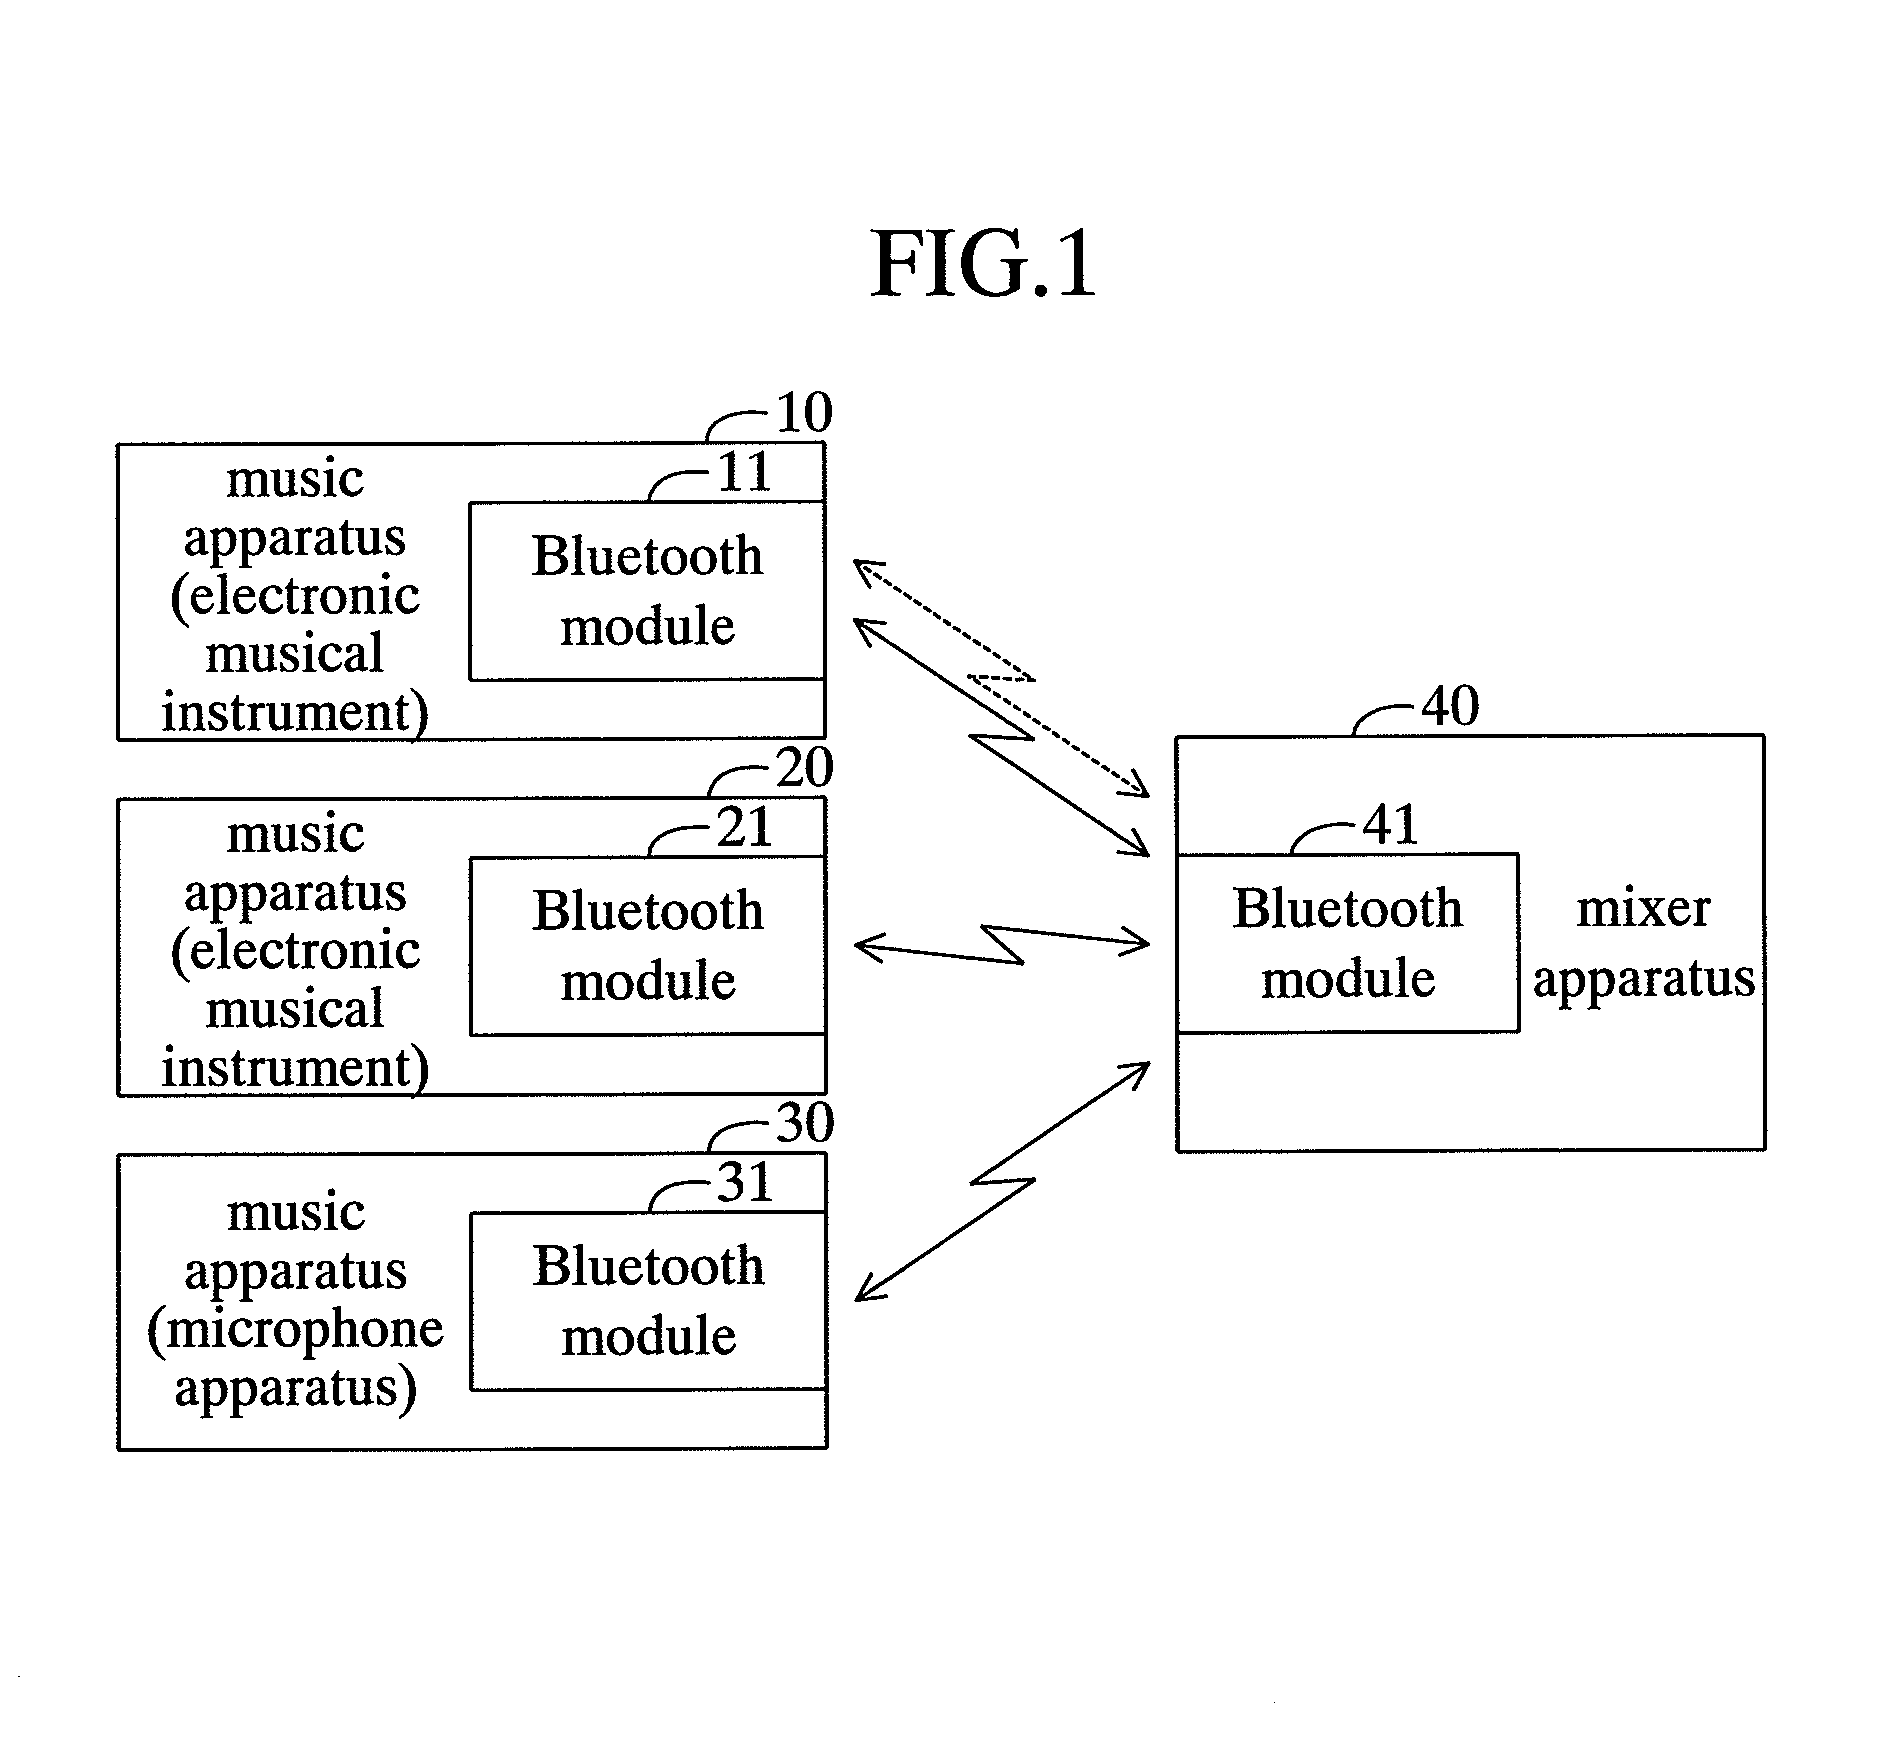 Mixer apparatus and music apparatus capable of communicating with the mixer apparatus